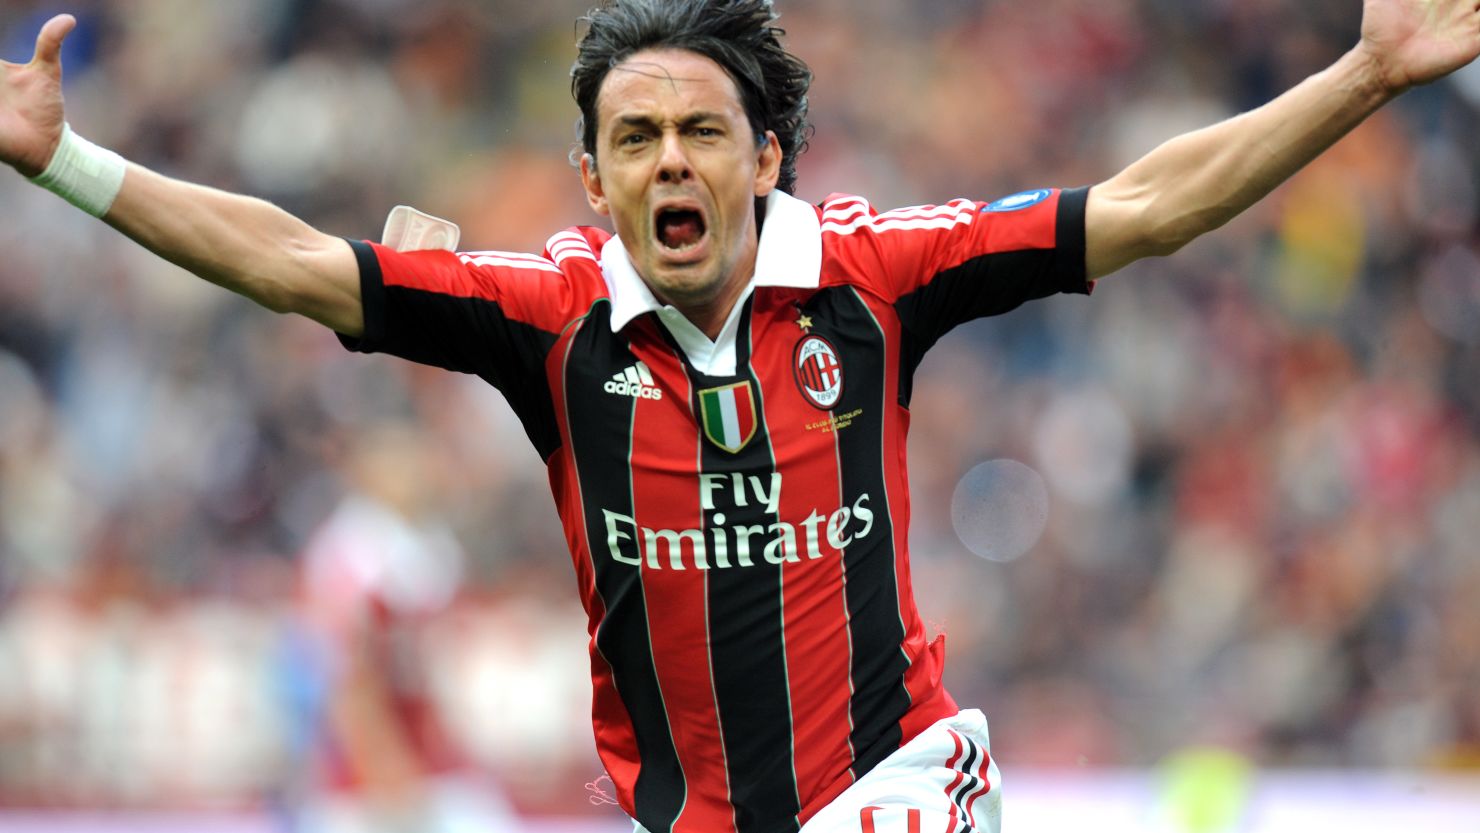 Filippo Inzaghi was a favorite with fans during his playing days at Milan.